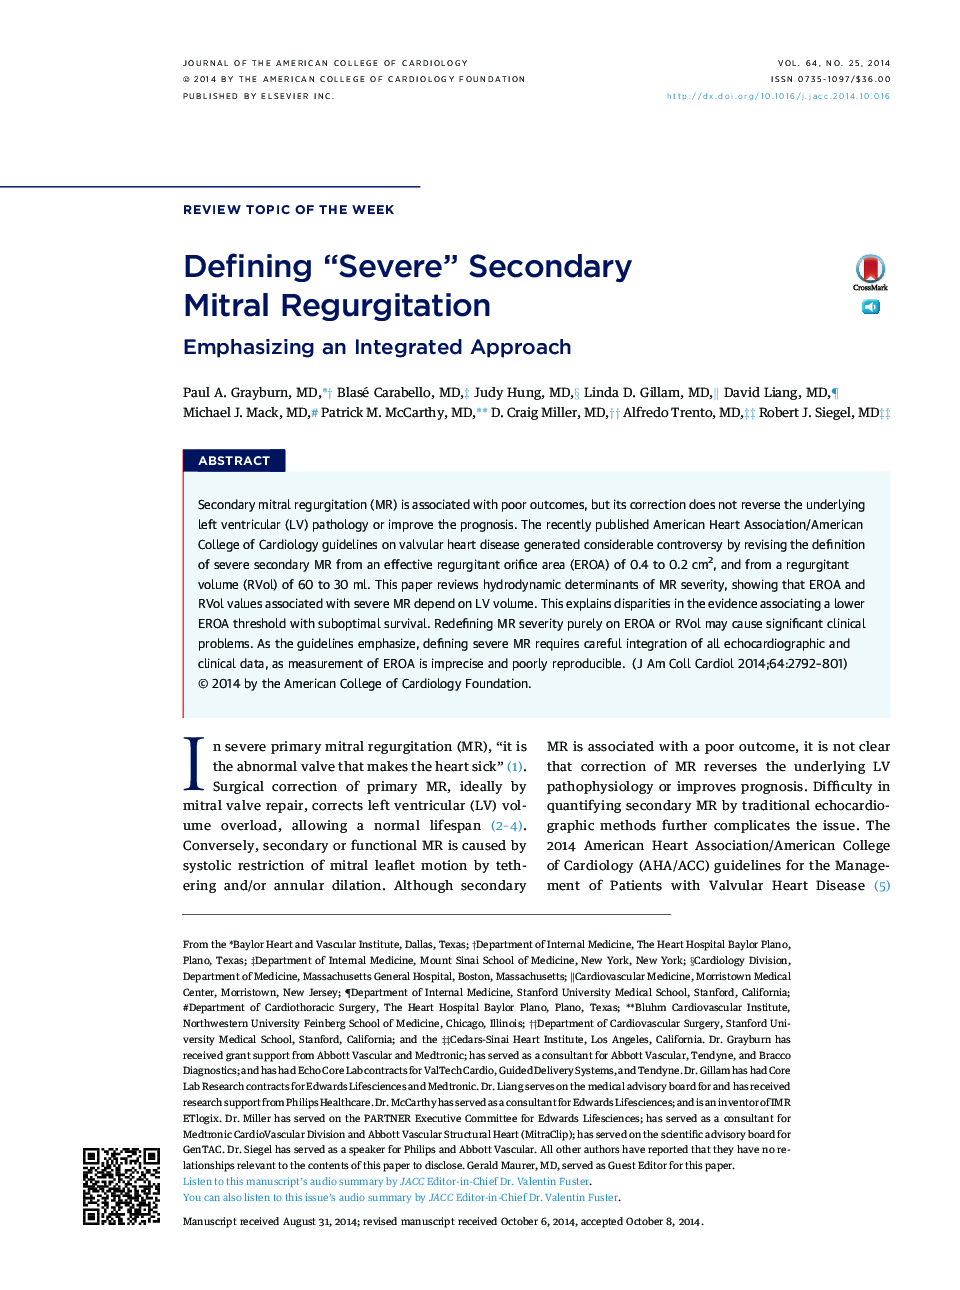 Defining “Severe” Secondary Mitral Regurgitation : Emphasizing an Integrated Approach